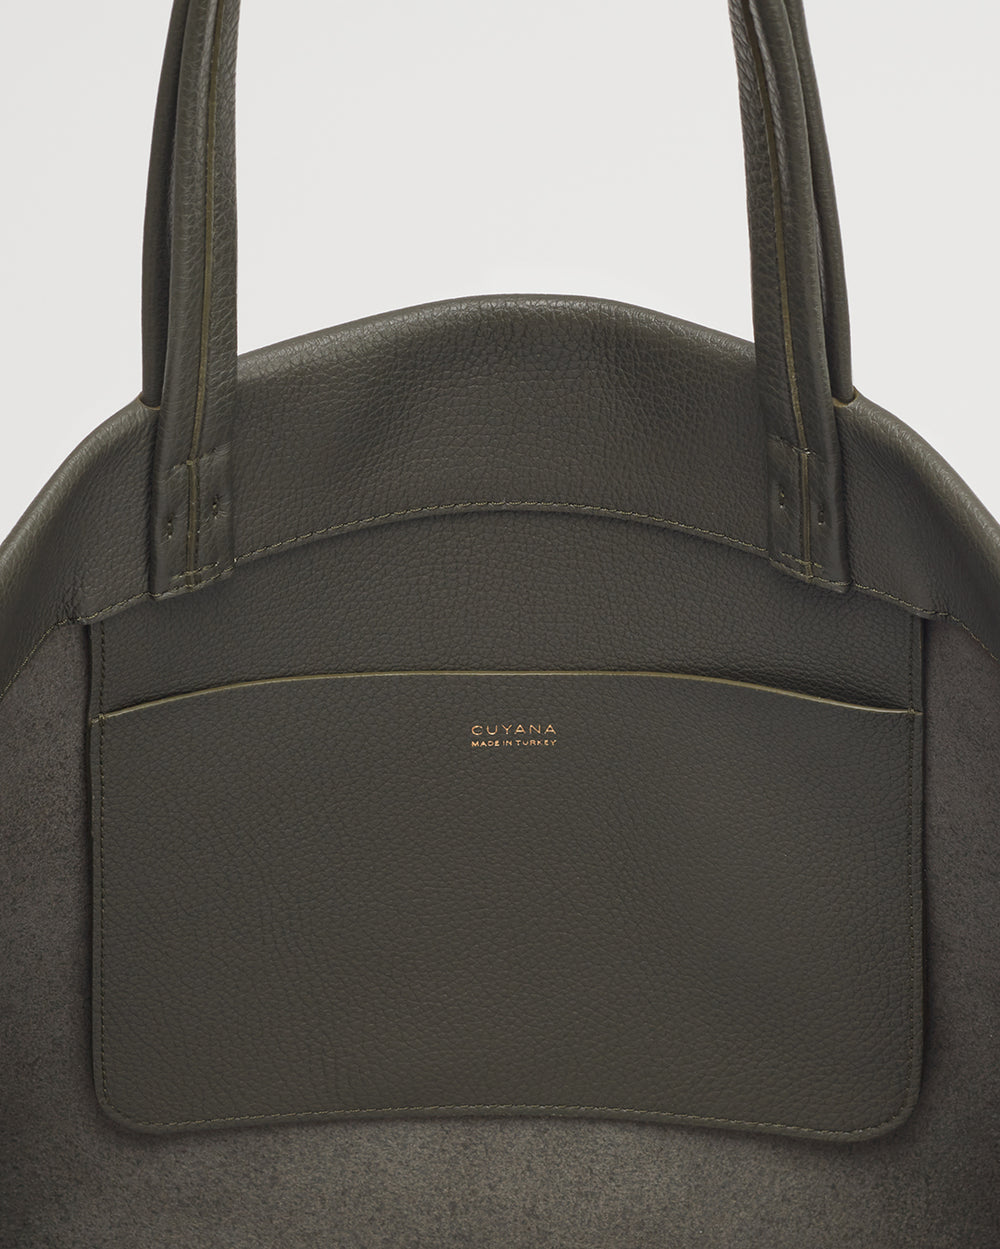 Close-up view of a handbag with dual handles and a front pocket.